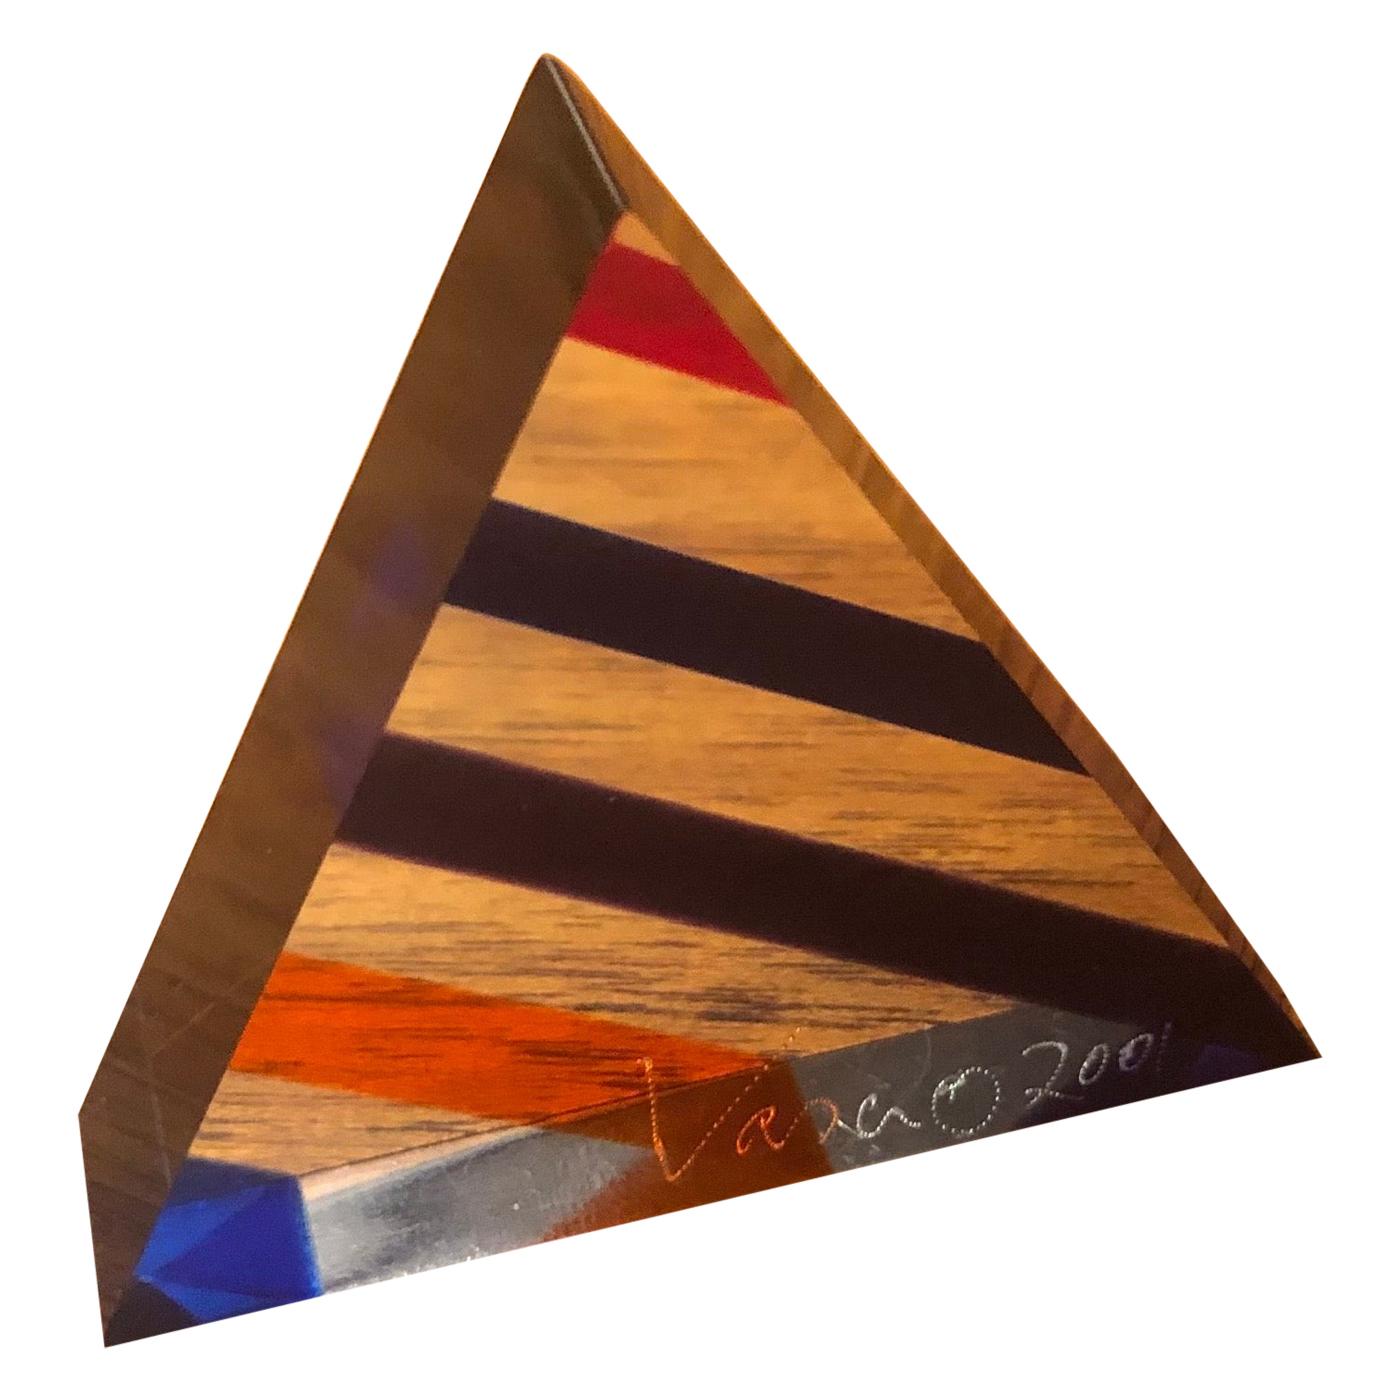 Op Art Acrylic Triangle Pyramid Sculpture / Paperweight by Vasa Mihich